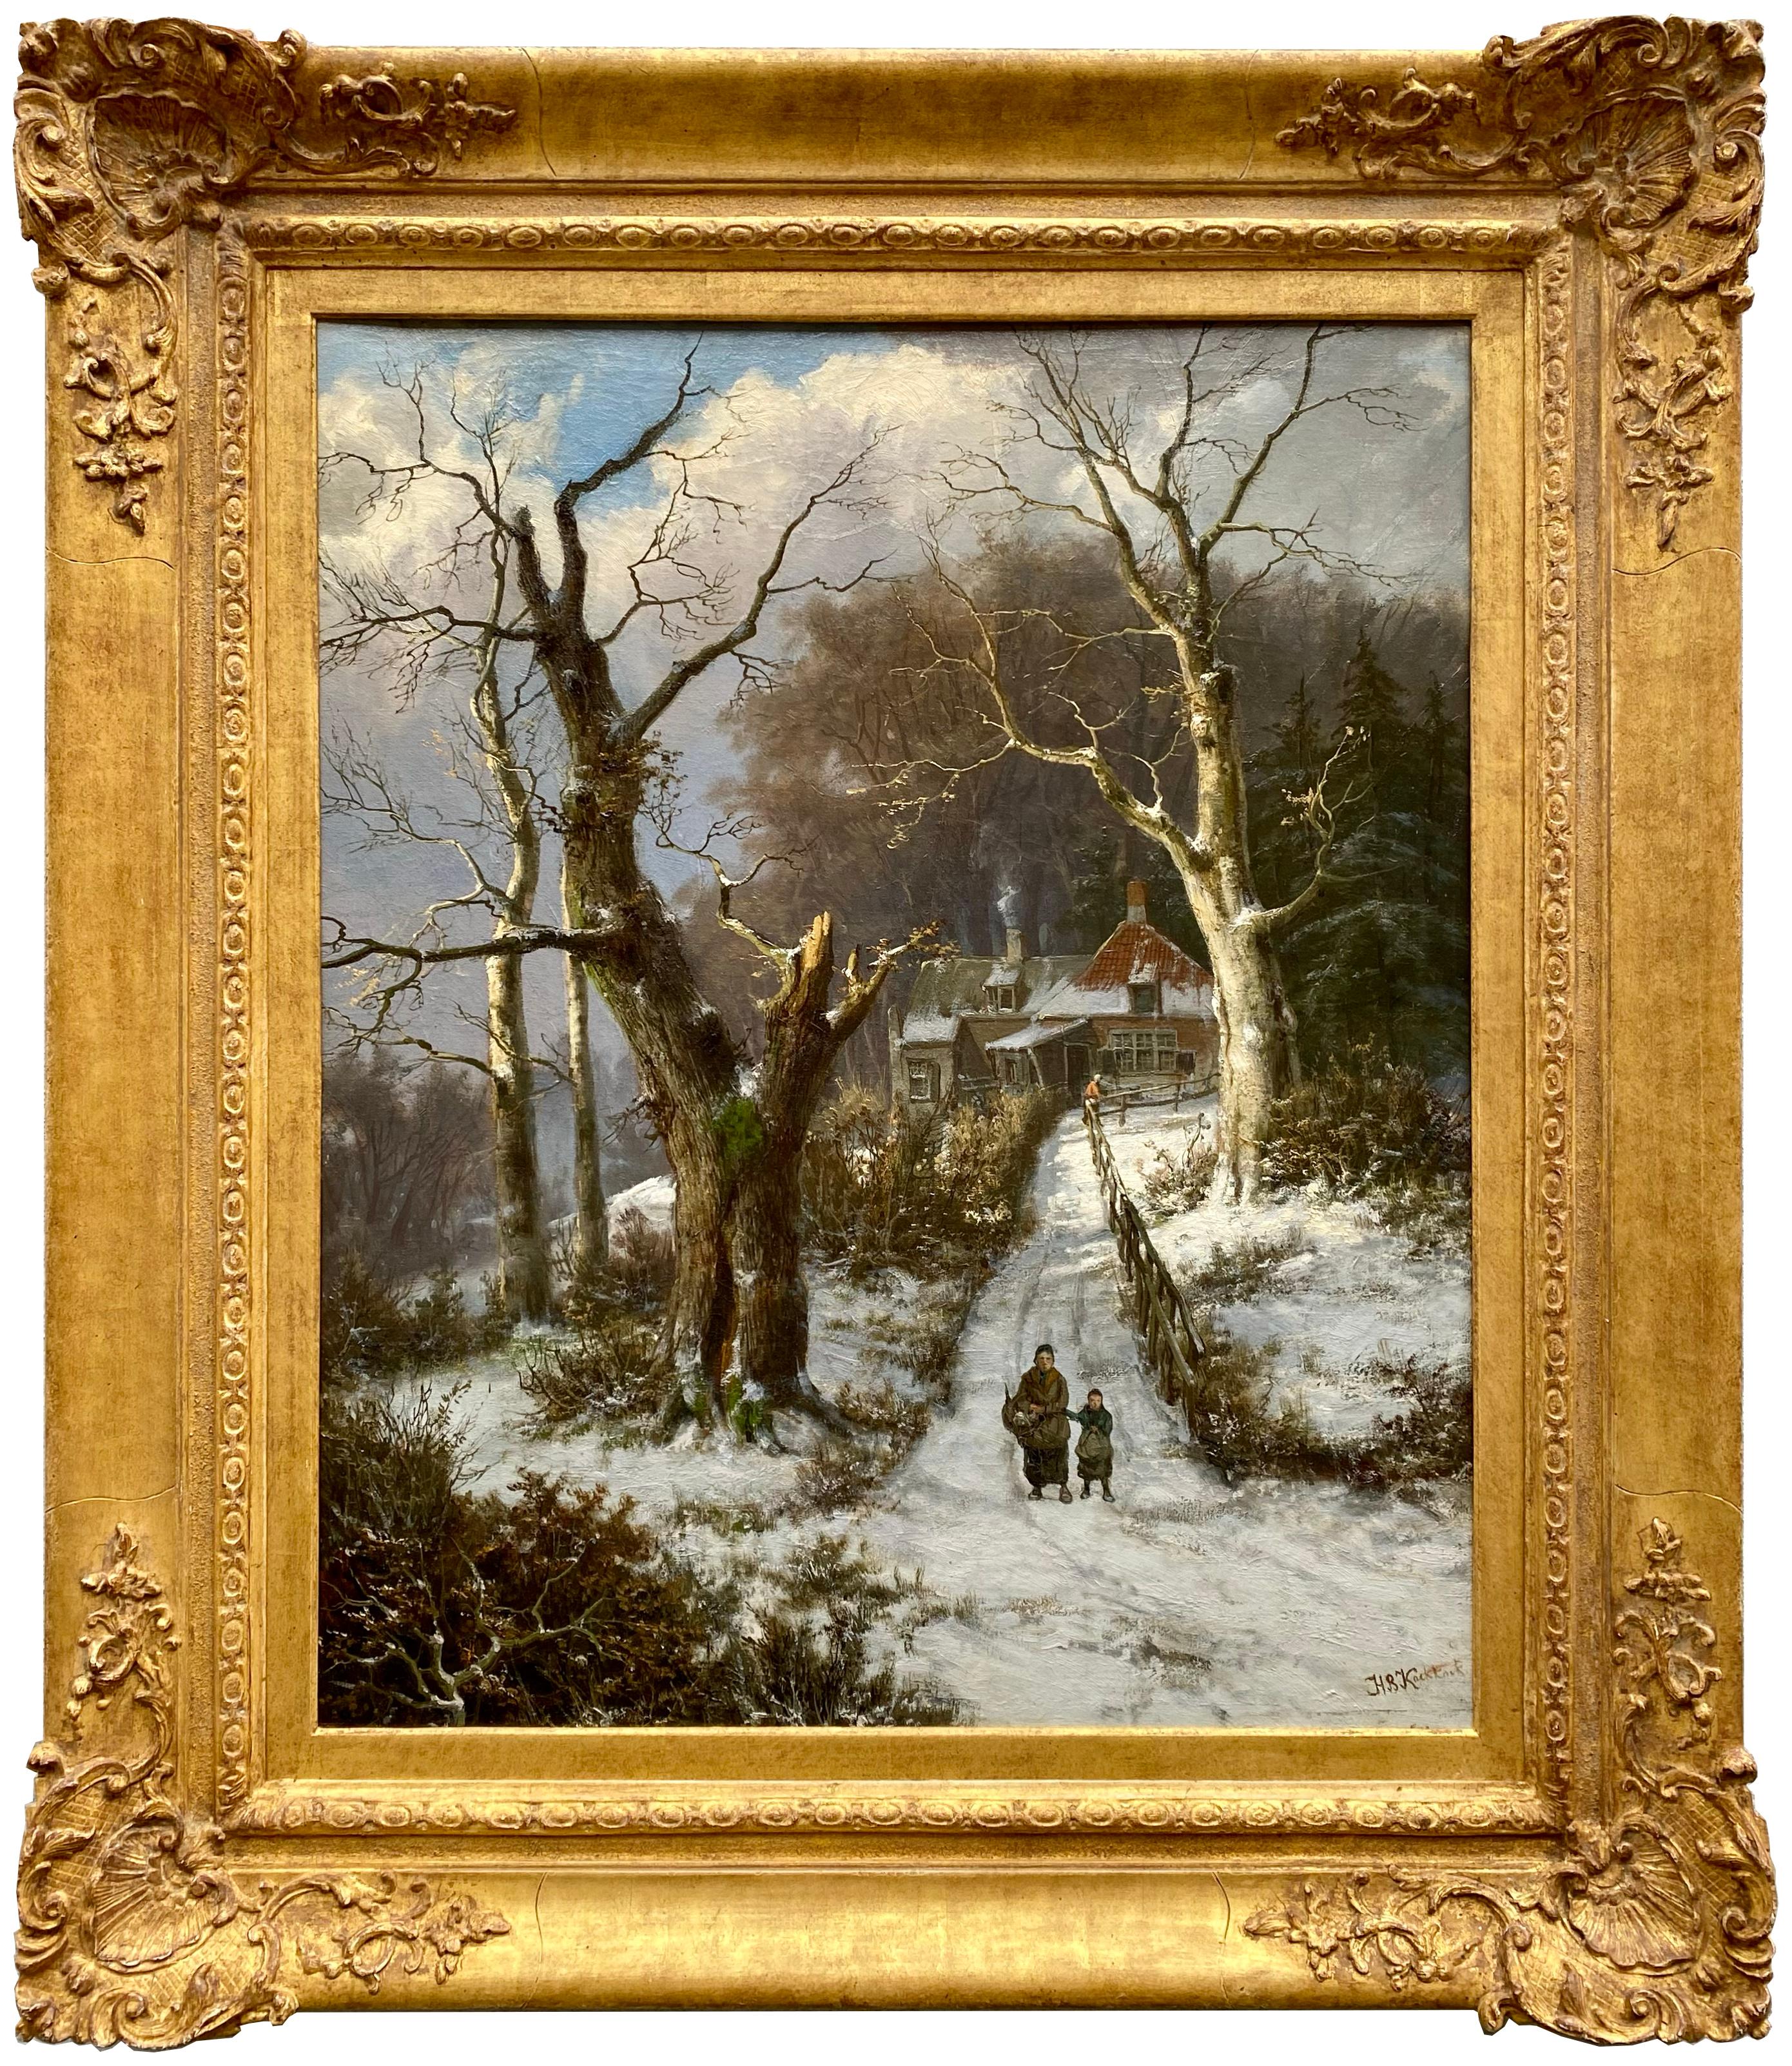 Hendrik Barend Koekkoek
Amsterdam 1849 – 1909 London
Dutch Painter

"Figures Strolling through a Forest in Winter"
Signature: signed lower right, c. 1882-1900
Medium: Oil on canvas
Dimensions: Image size 76,5 x 64 cm, frame size 103 x 89,50